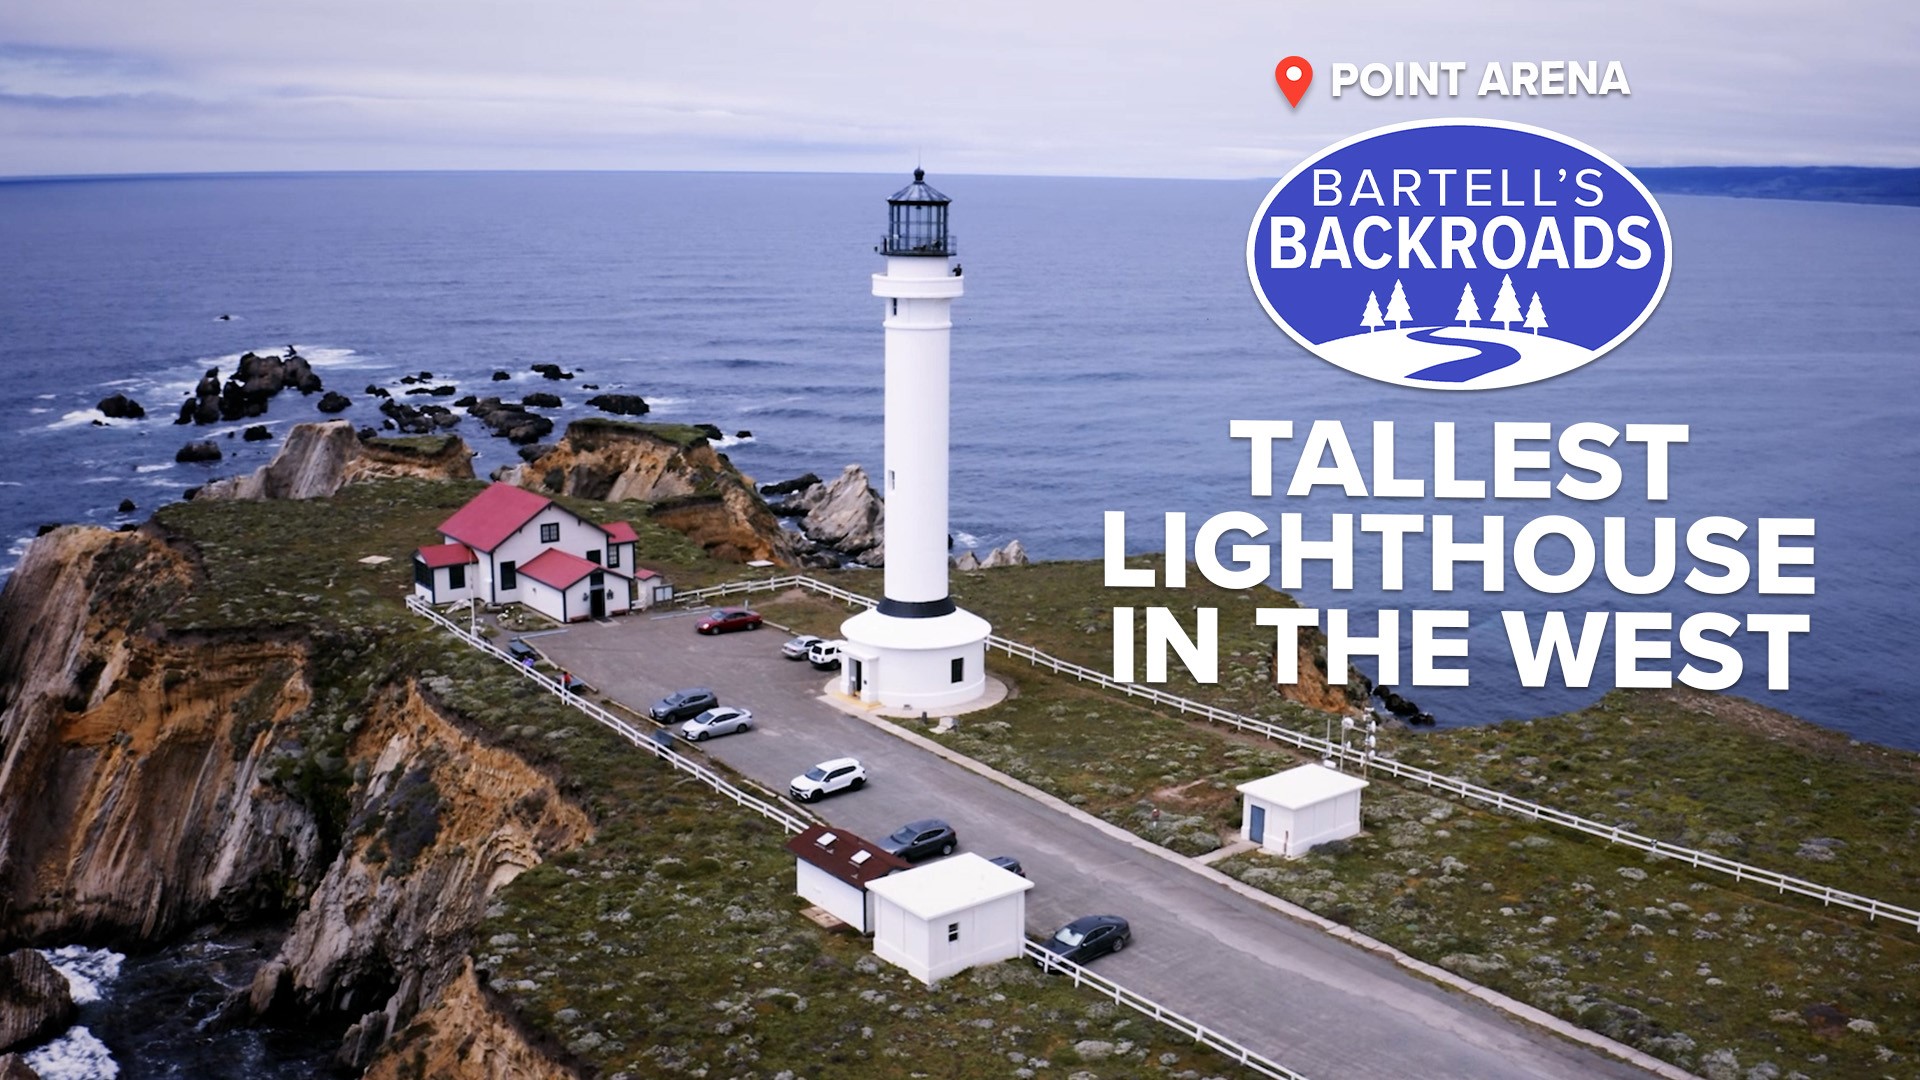 Climb the 145 steps to the top of the Point Arena lighthouse and do a little whale watching while you catch your breath.